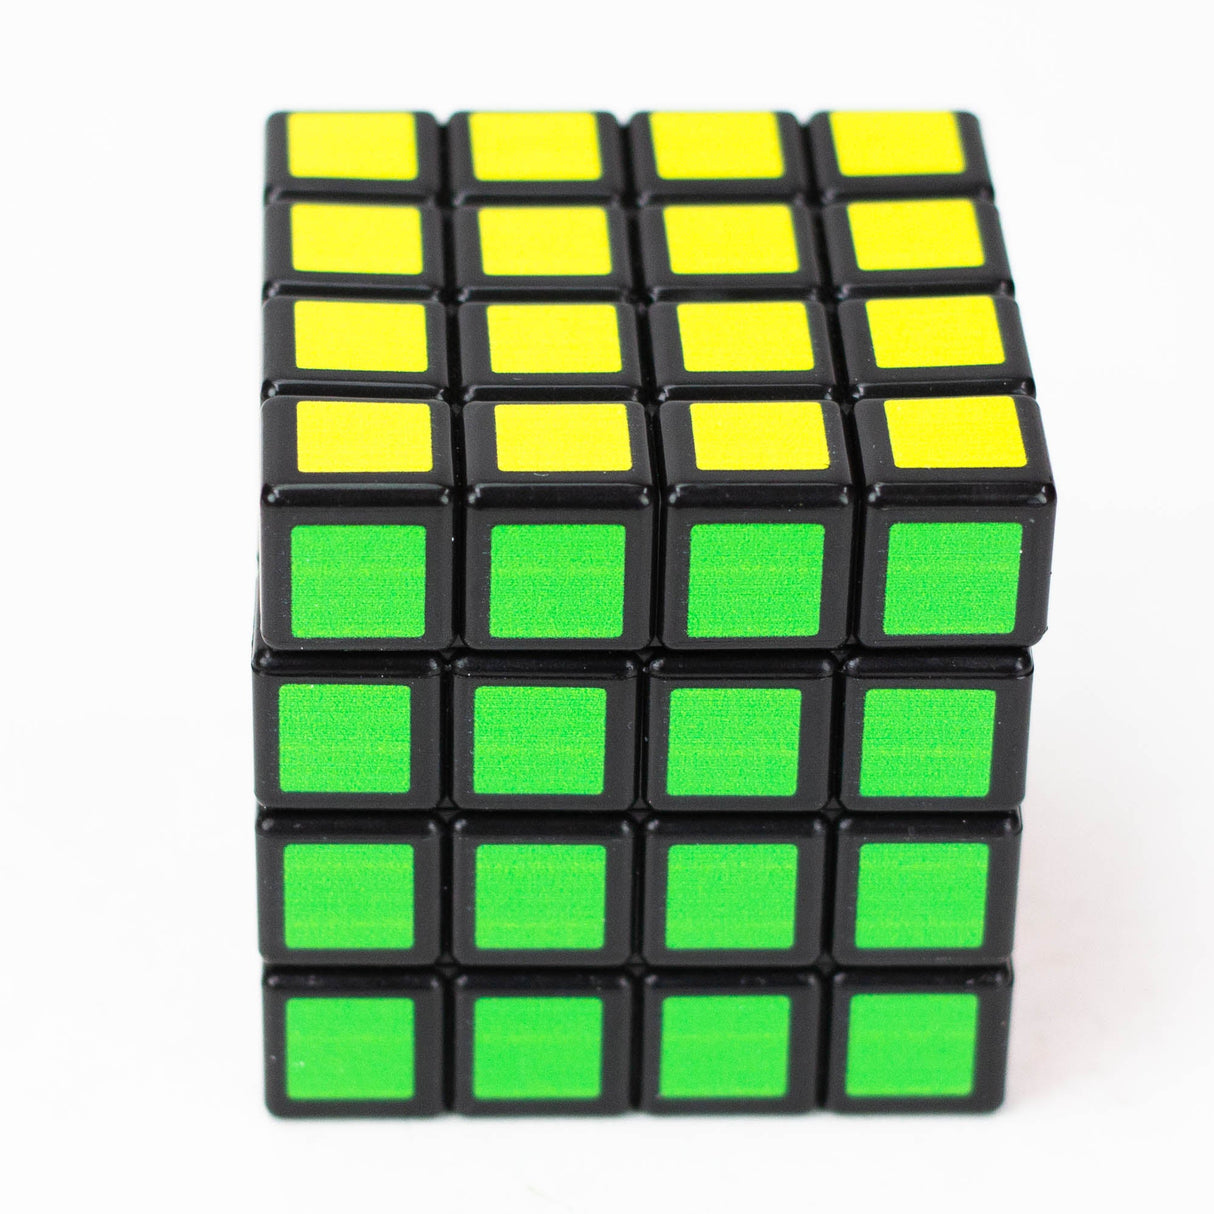 2.5" 4x4x4 Cube Grinder 4 Layers Box of 6 [GZ166]